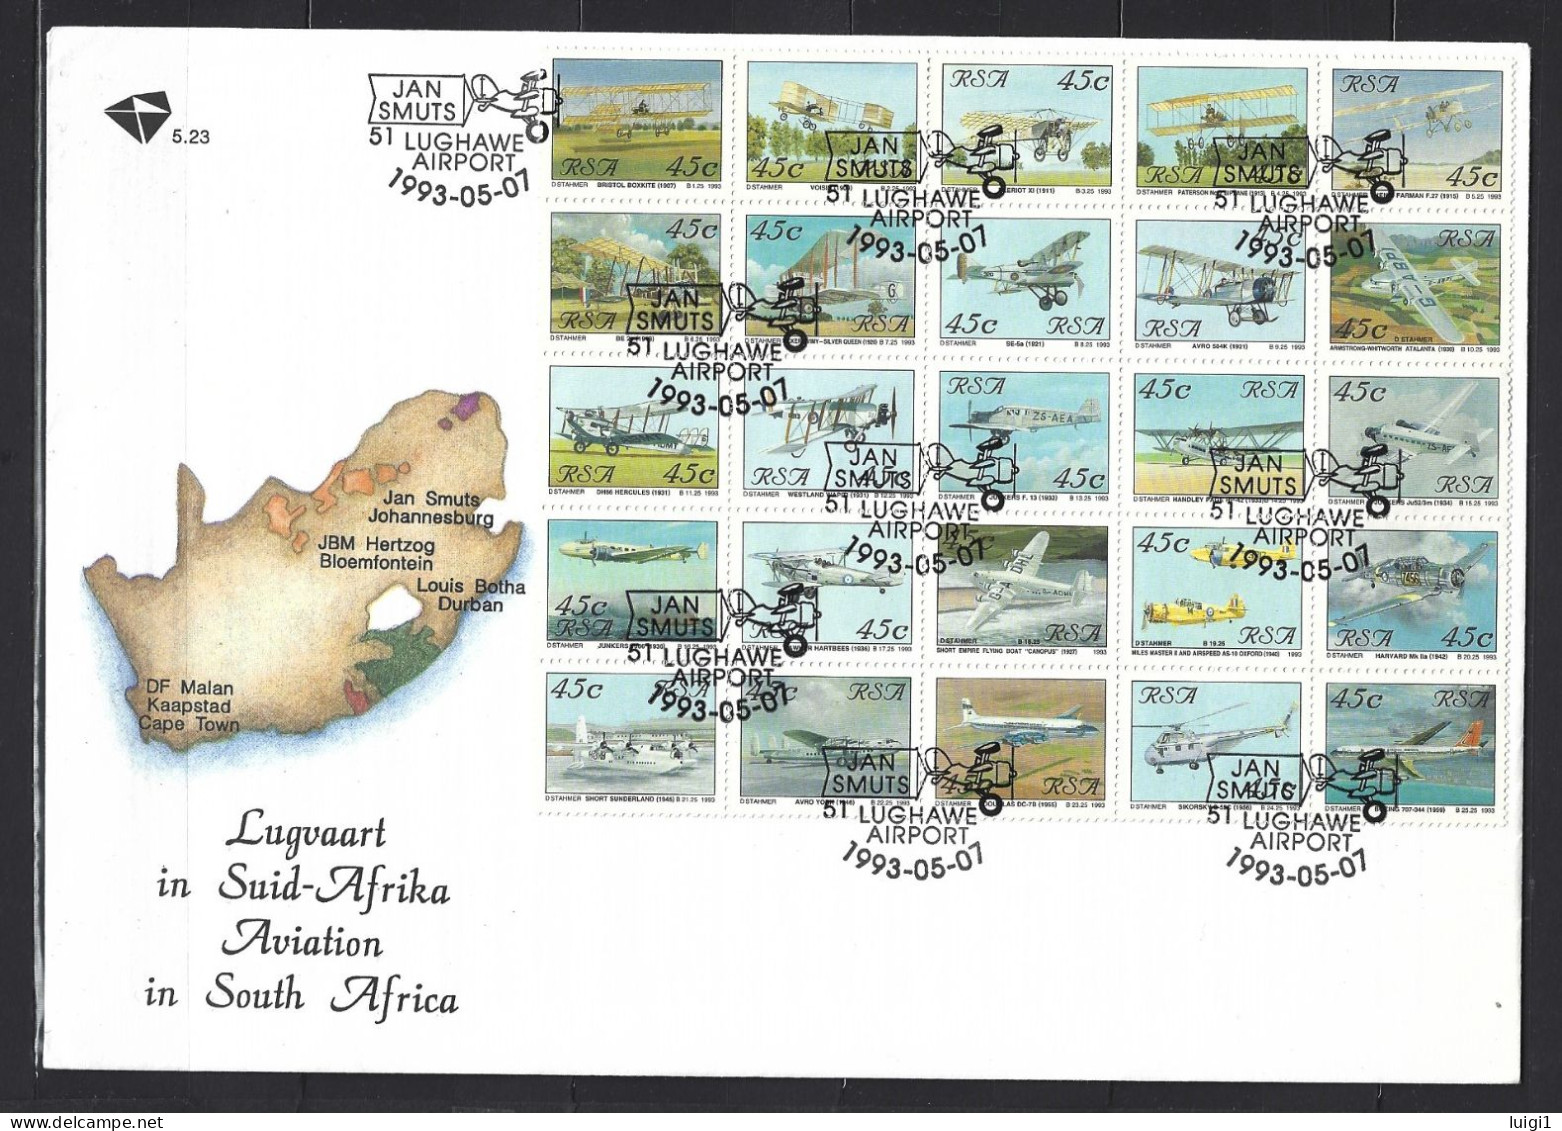 SOUTH AFRICA1993 - Bloc-feuillet Aviation Sud Africaine . Oblitération Du 1993-05-07. JAN SMUTS 51 LUGHAWE AIRPORT. - Covers & Documents